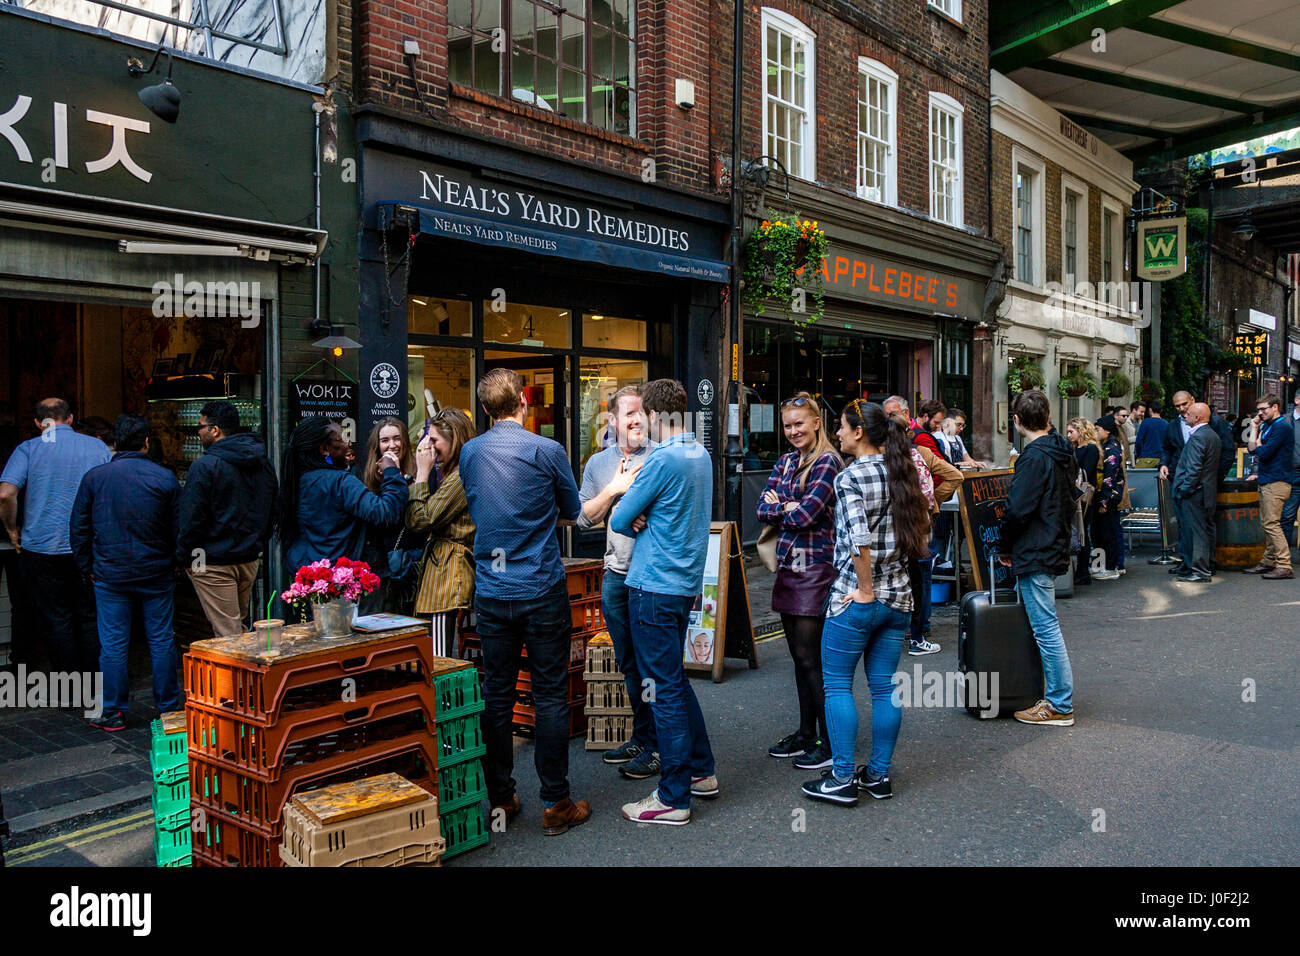 People Queueing At A Cafe In Borough Market During Lunch Time, Southwark, London, England Stock Photo